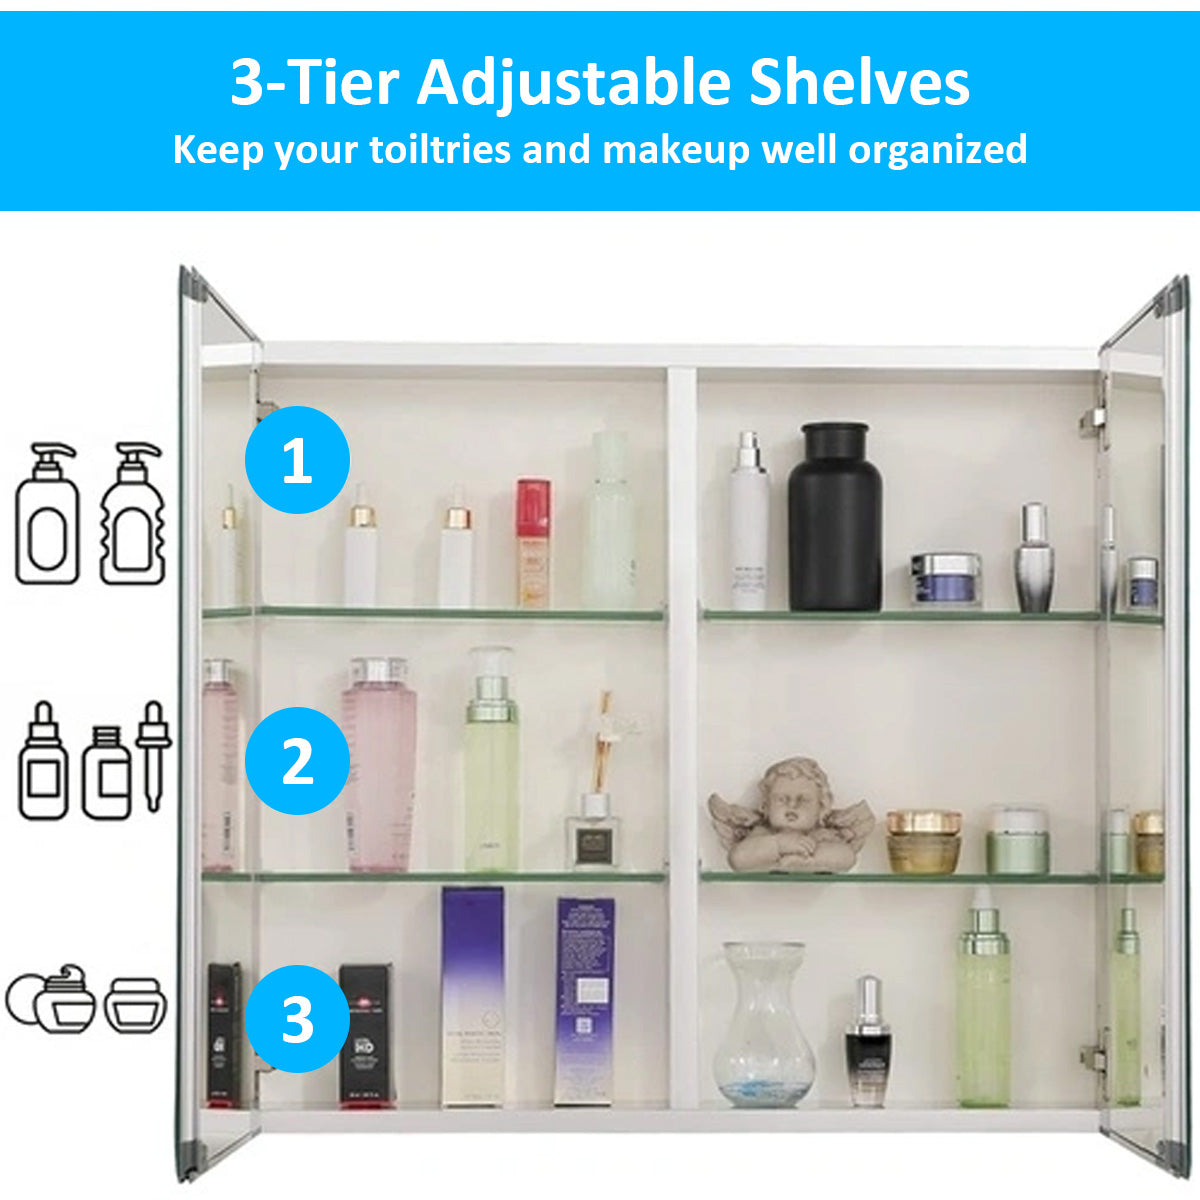 30&quot; x 26&quot; Premium Frameless Medicine Cabinet: Double-Sided Mirror, 2-Door, Adjustable Shelves, Soft-Closing, Surface or Recessed Installation, for Bathroom, Bedroom, Hotel